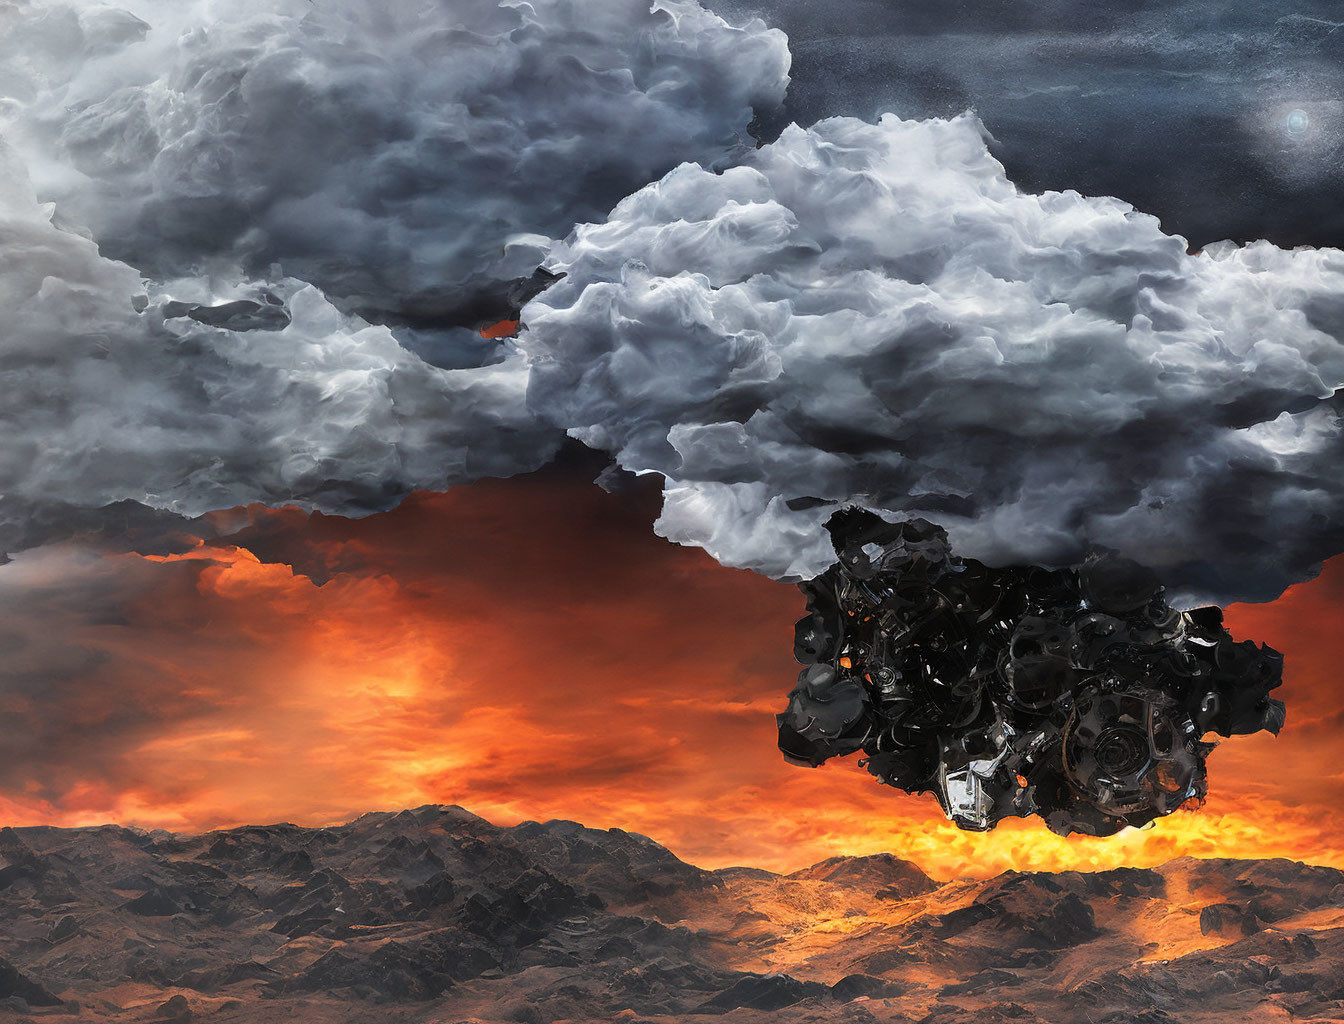 Dystopian landscape with ominous clouds and swirling debris.